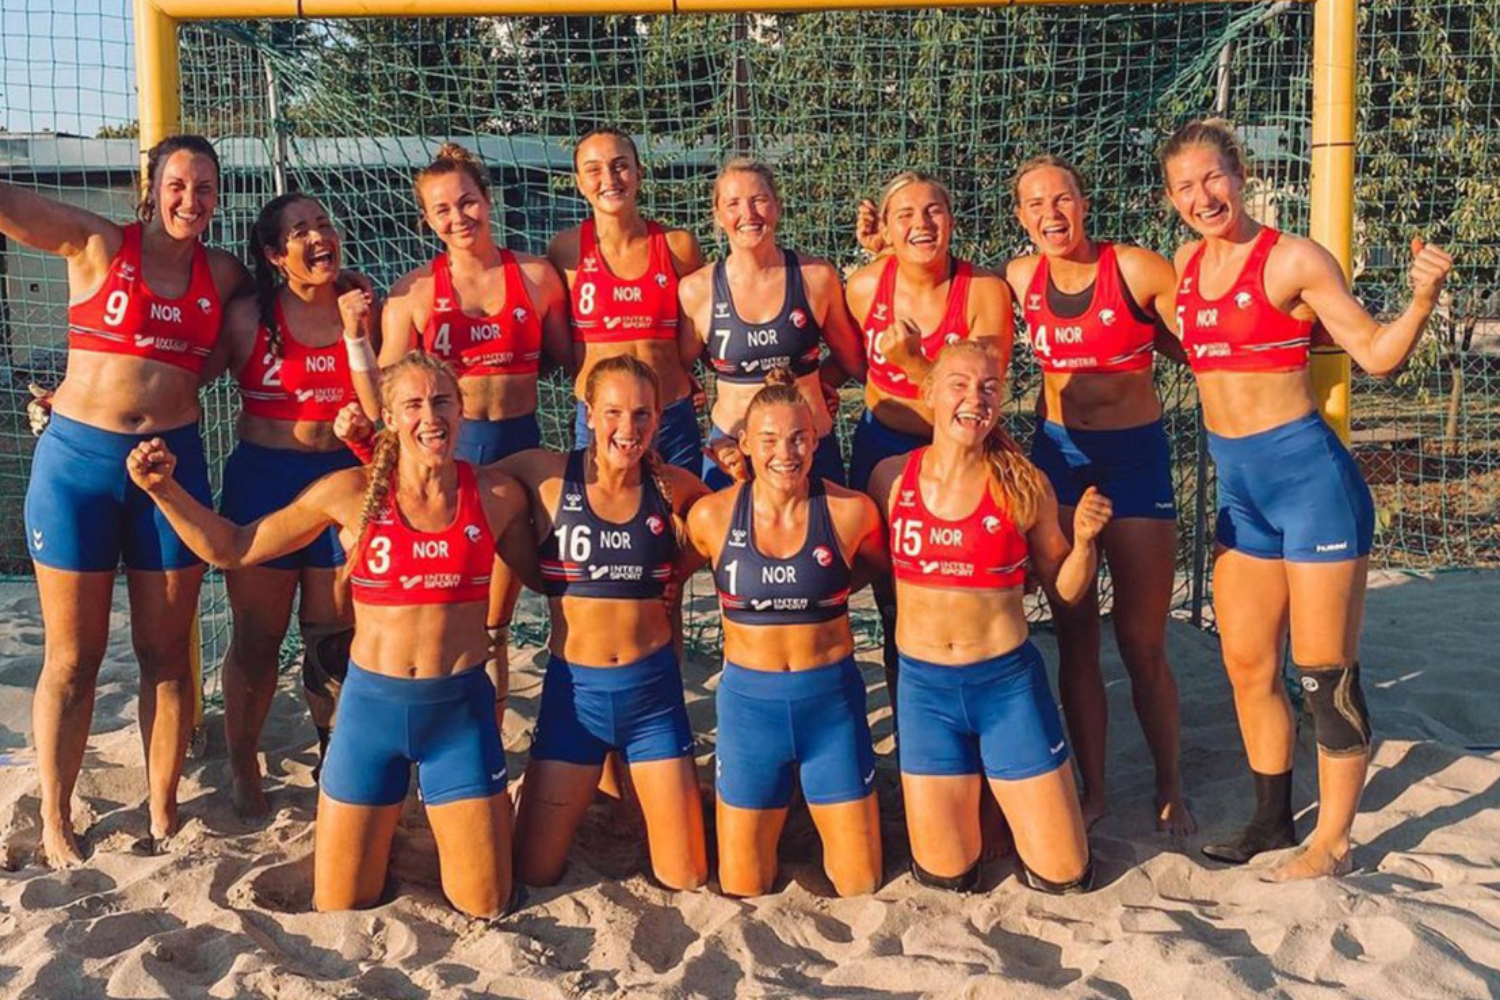 norway women's handball team poses for a group photo in sports bras and shorts